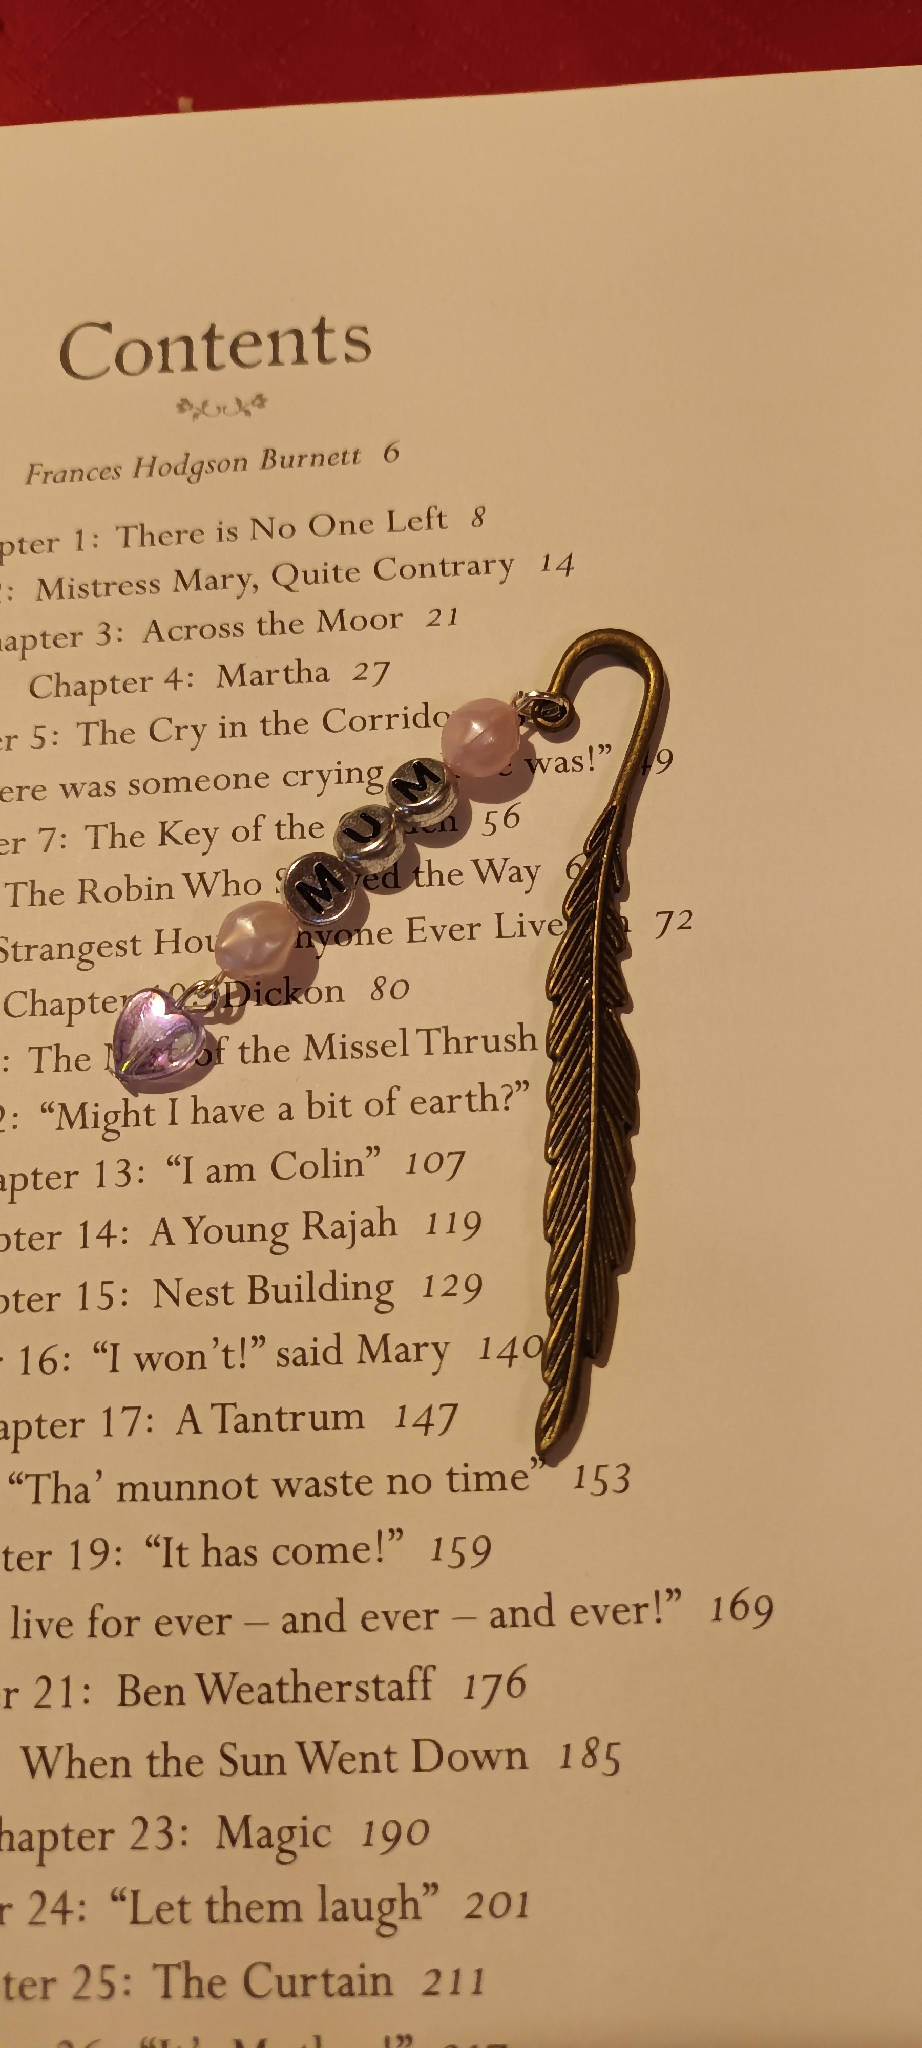 Mother Bookmark